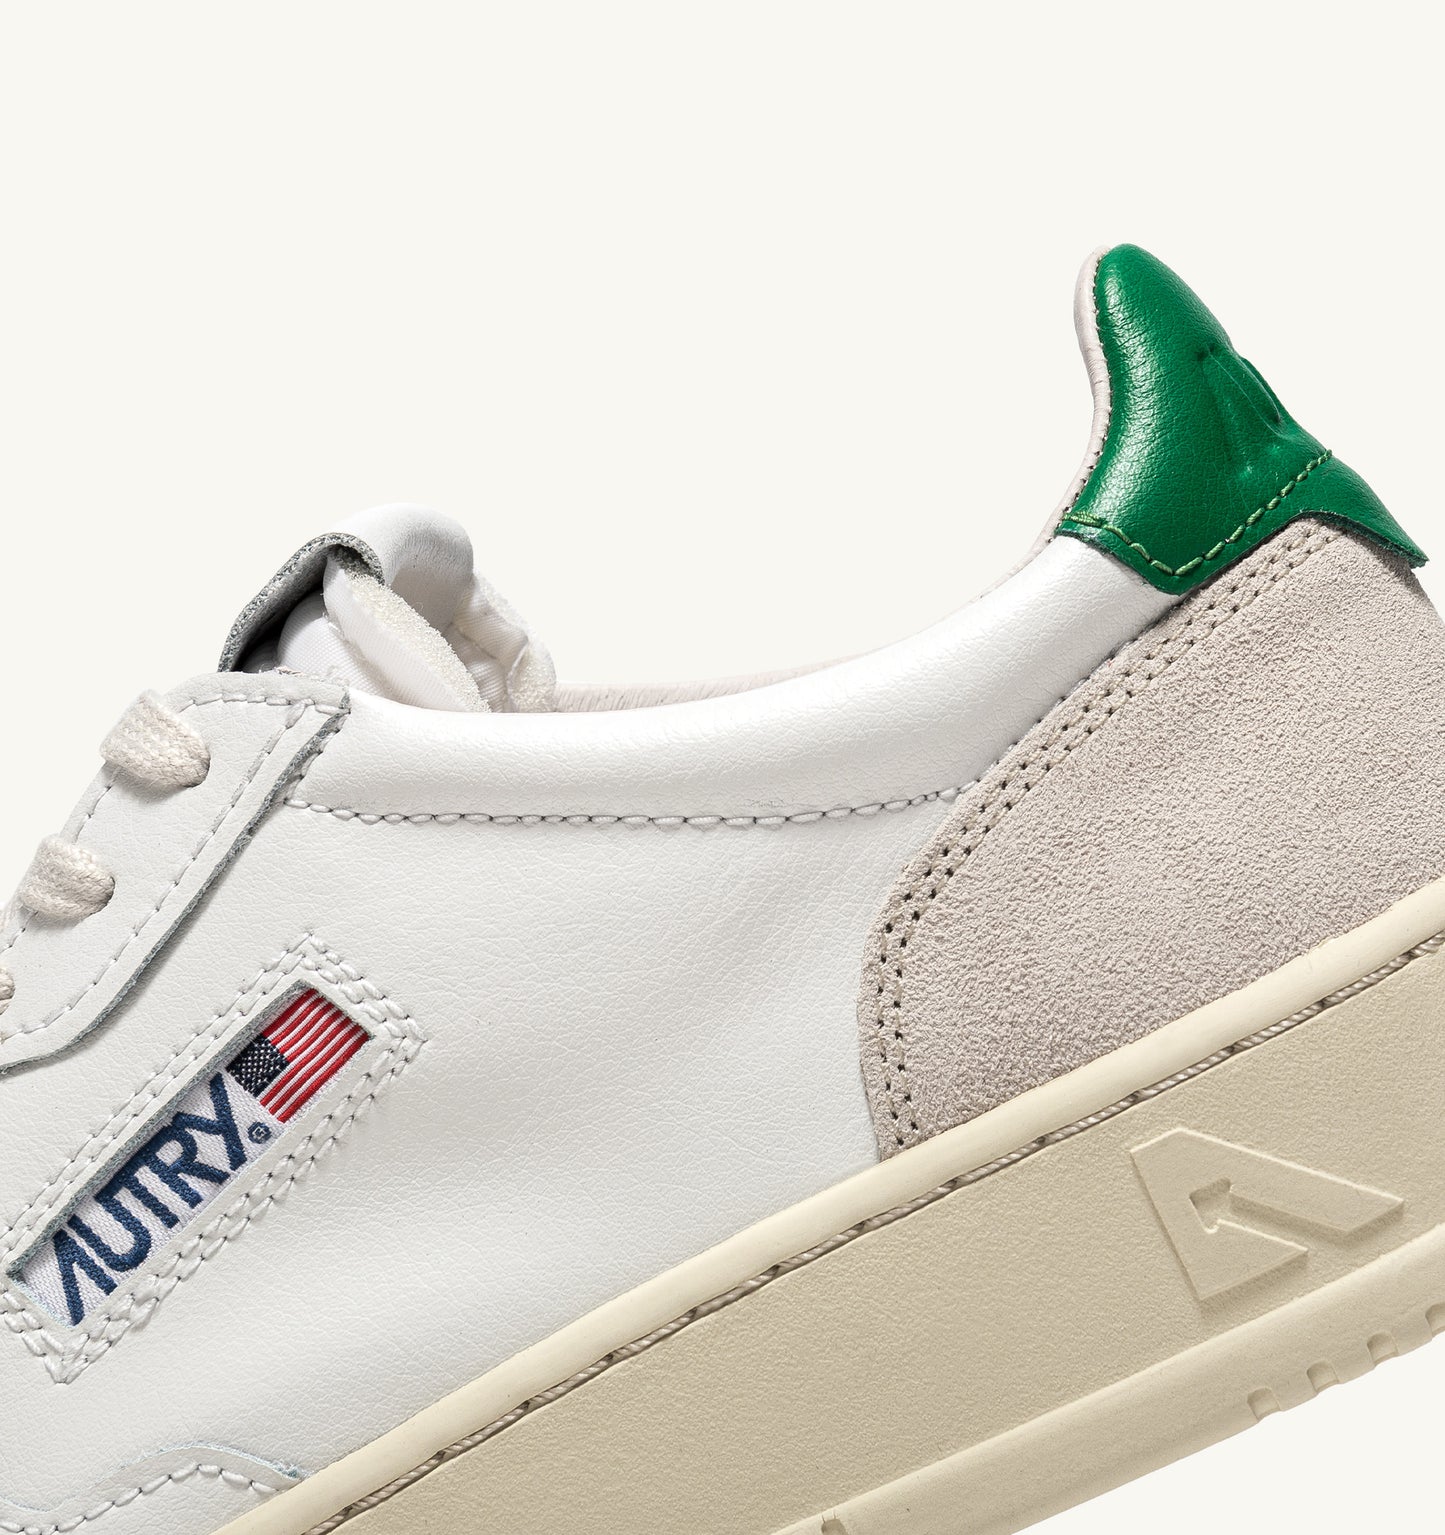 MEDALIST LOW SUEDE/LEATHER WHITE/AMAZON LS23